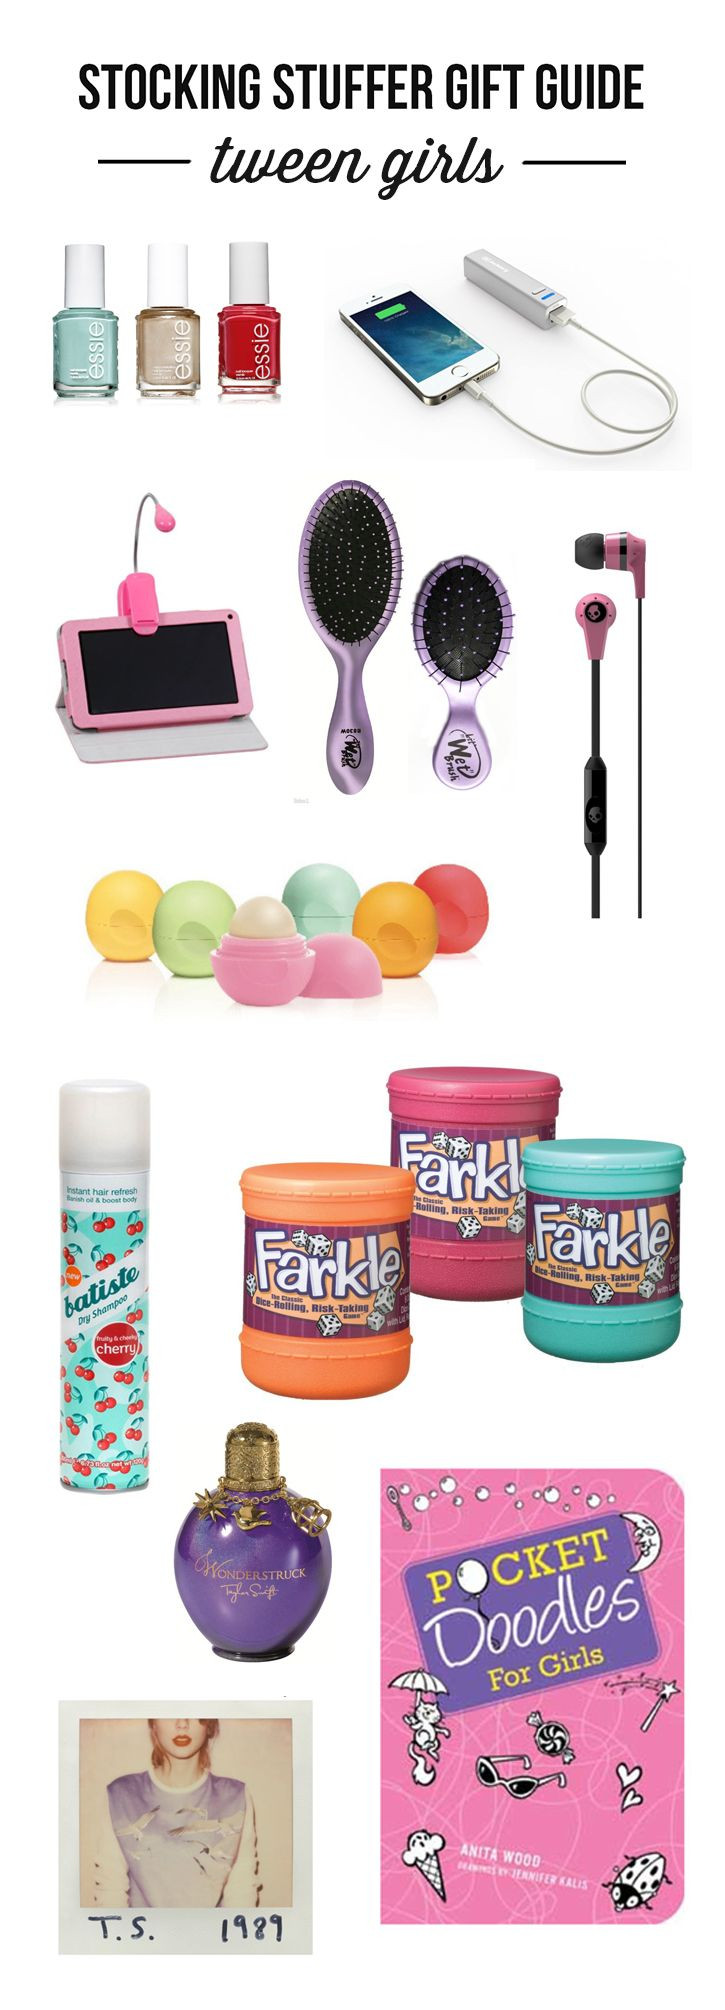 Tween Girls Gift Ideas
 Ultimate Stocking Stuffer Gift Guide for Kids of all Ages